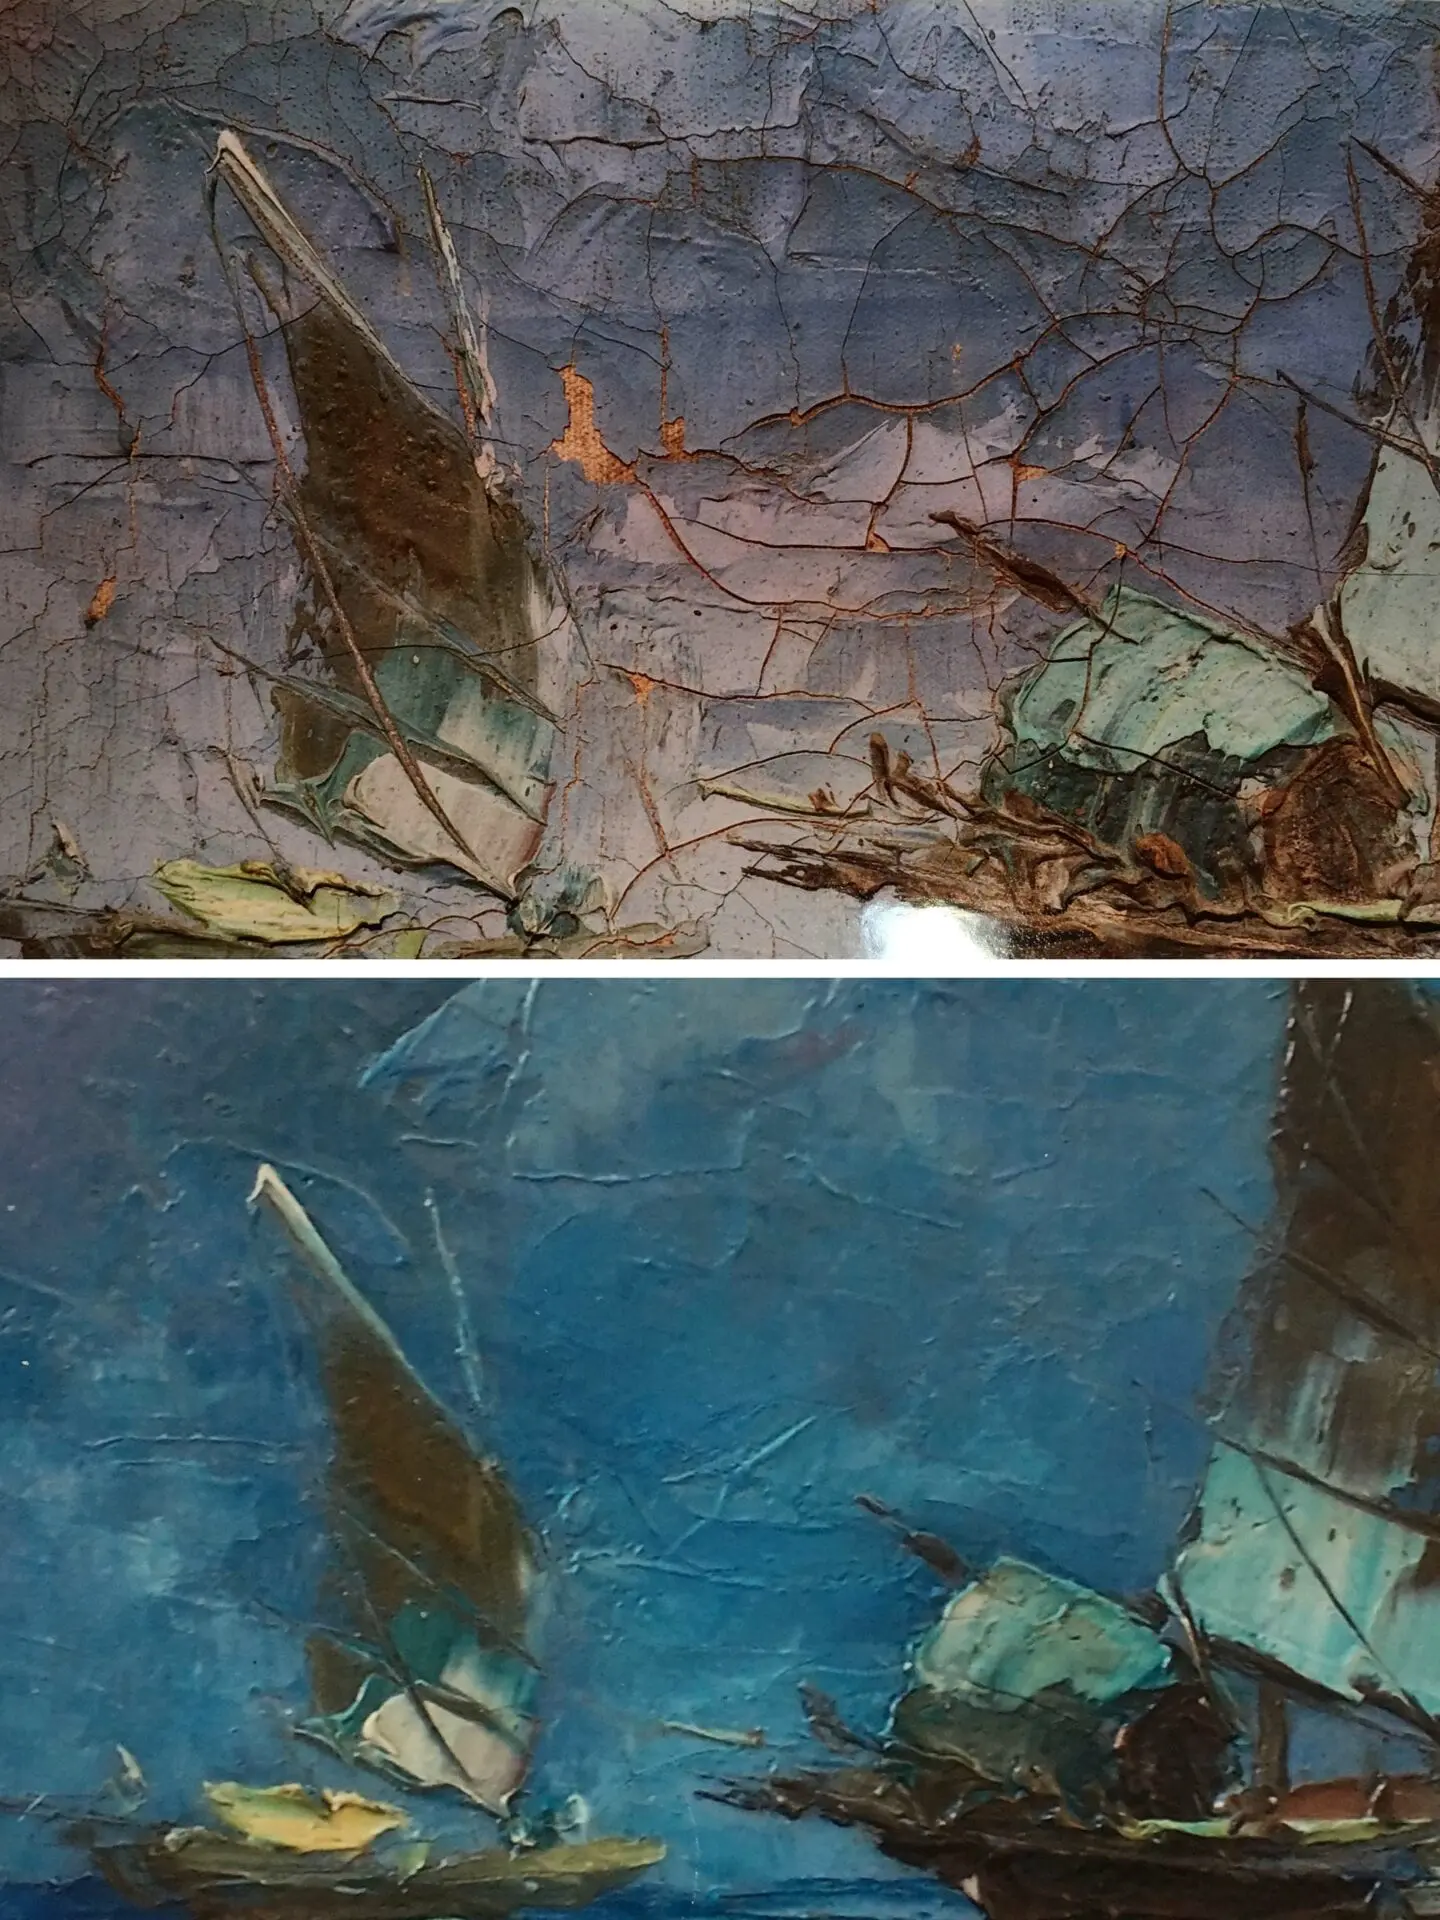 A painting of leaves and water in the background.